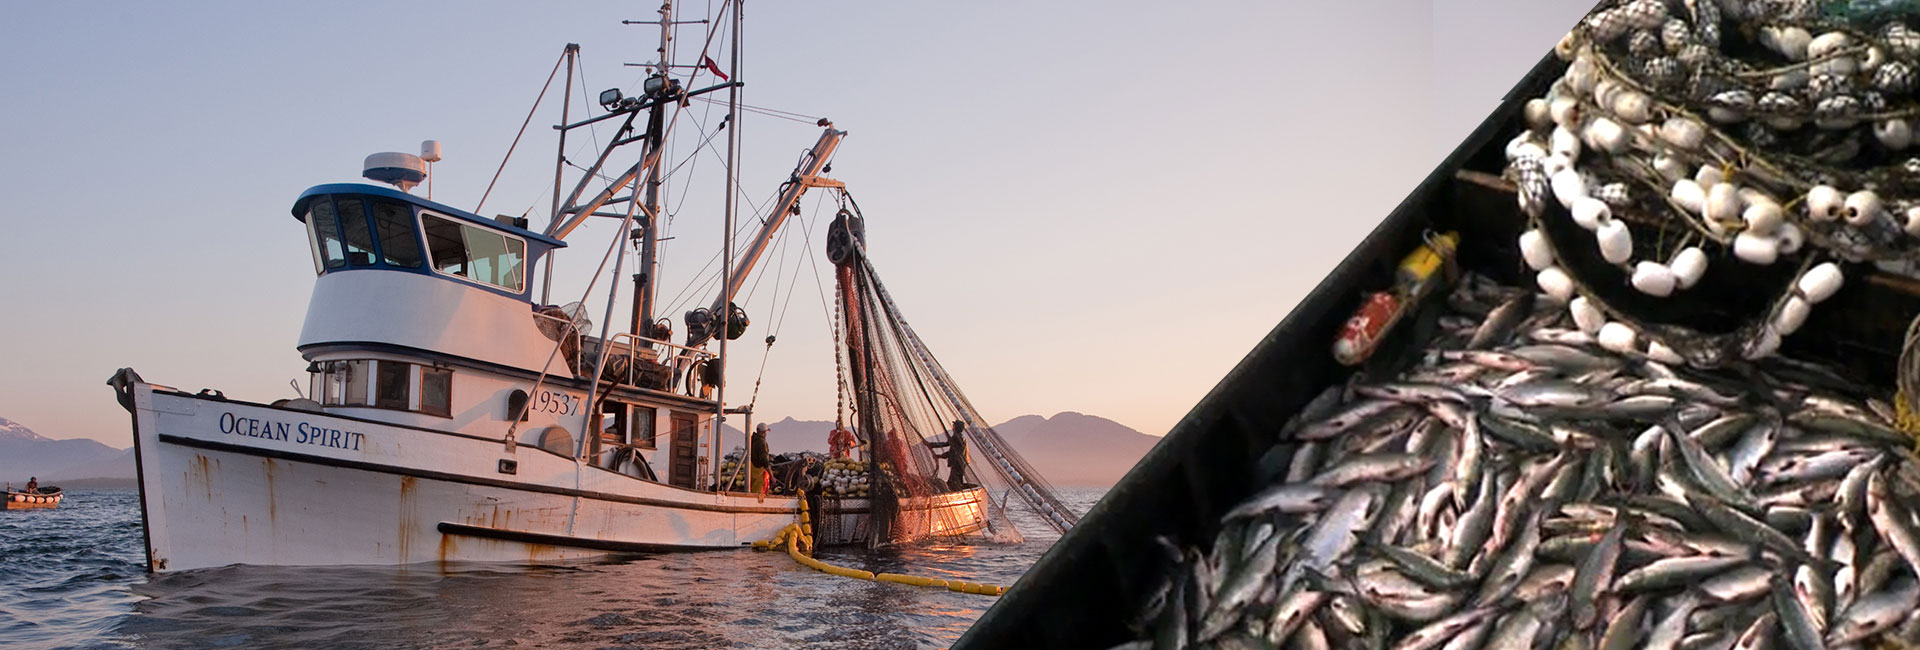 Ketchikan Commercial Seine Fishing: Sunset Catch